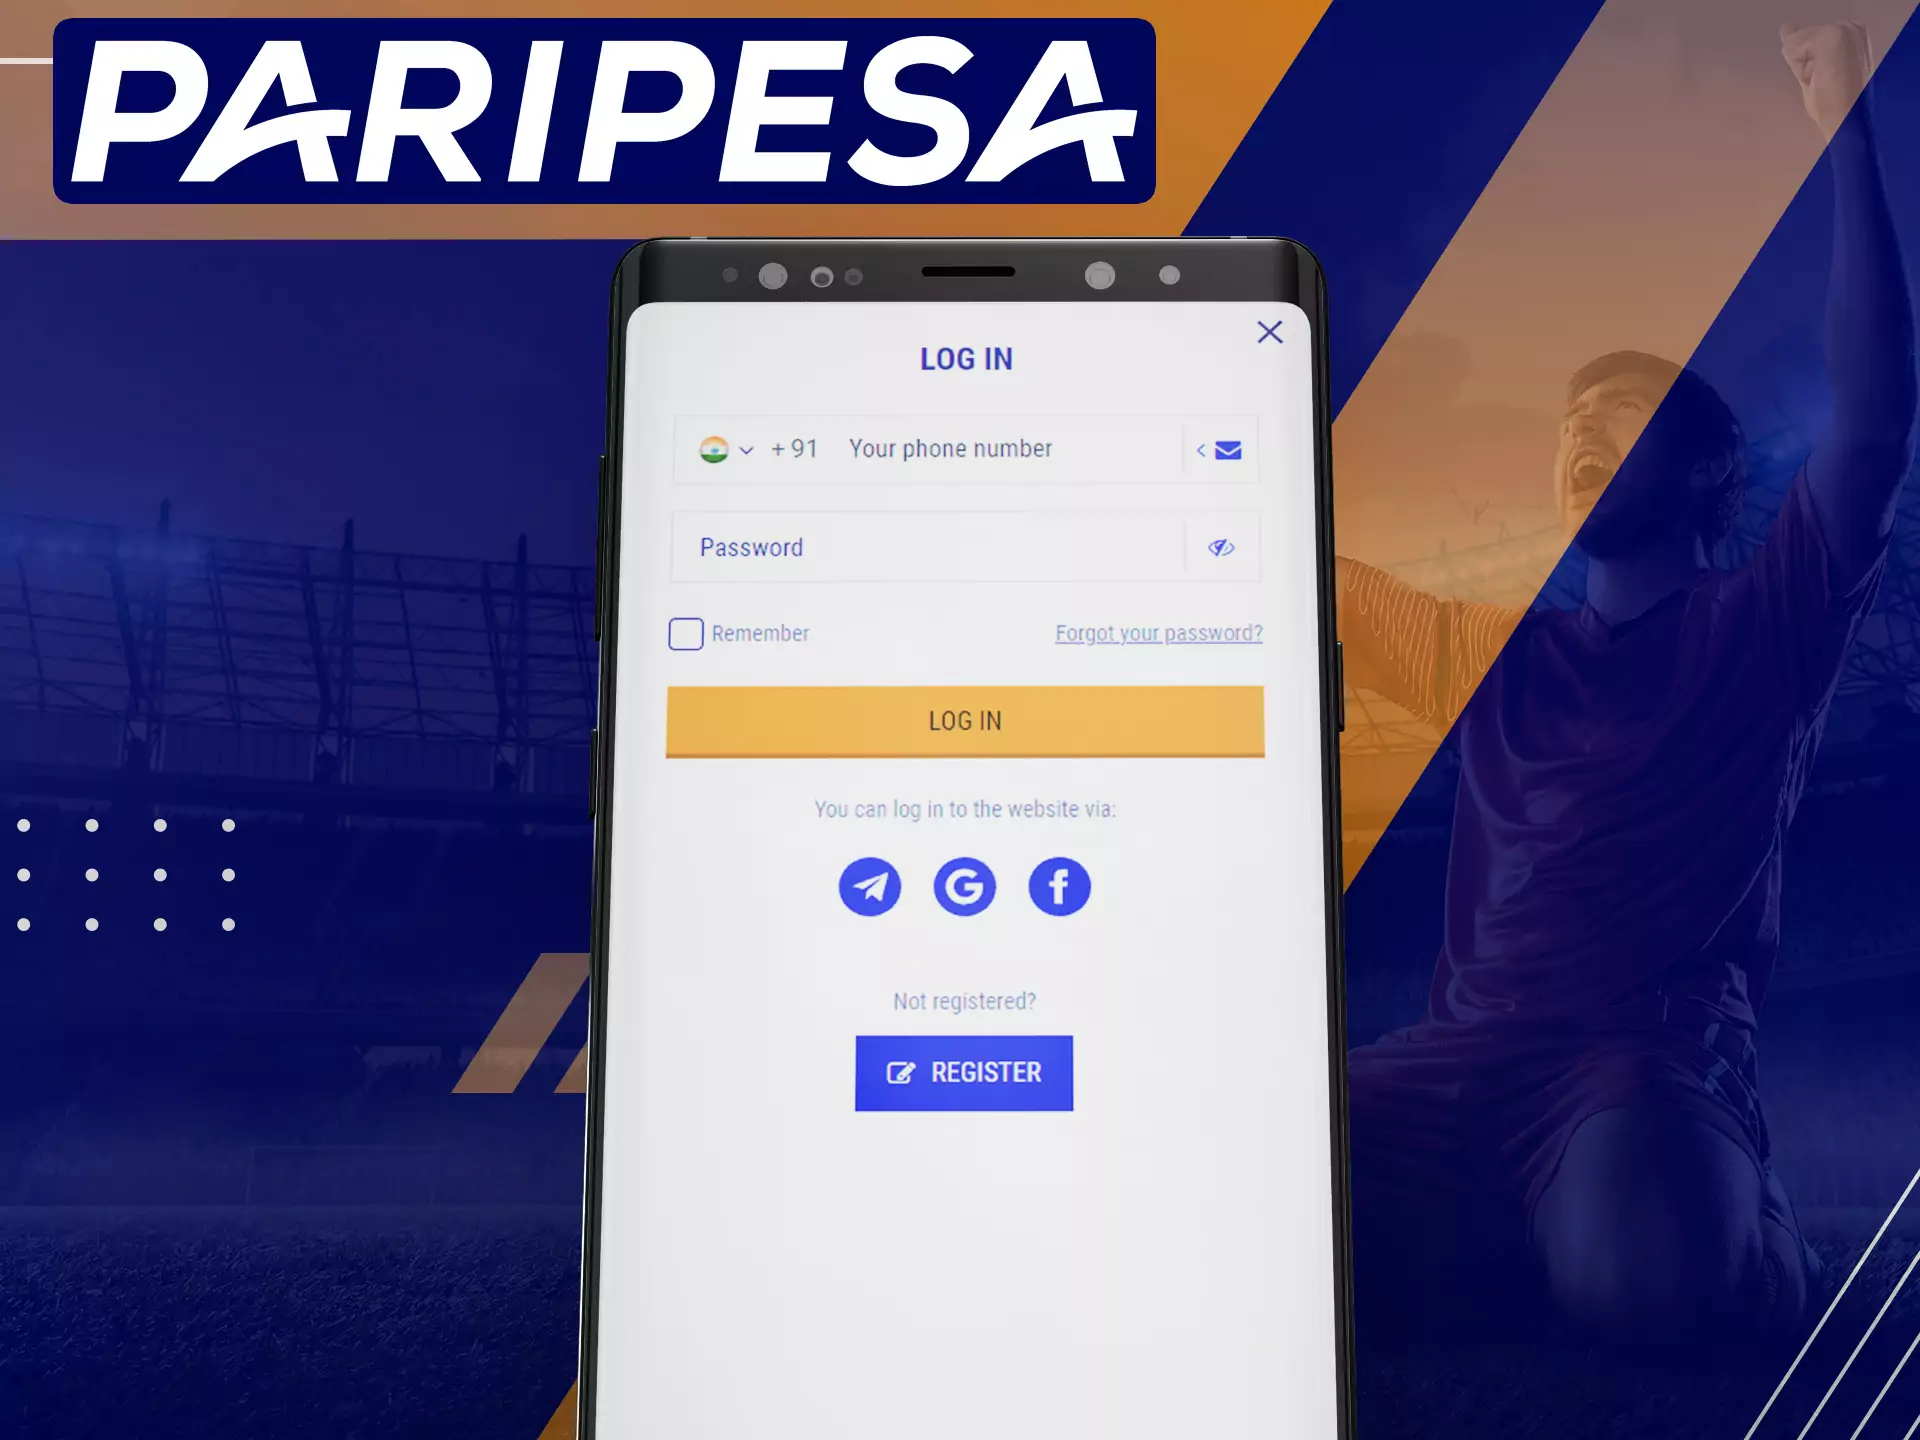 On the Paripesa app, log in to your account to get all the features.